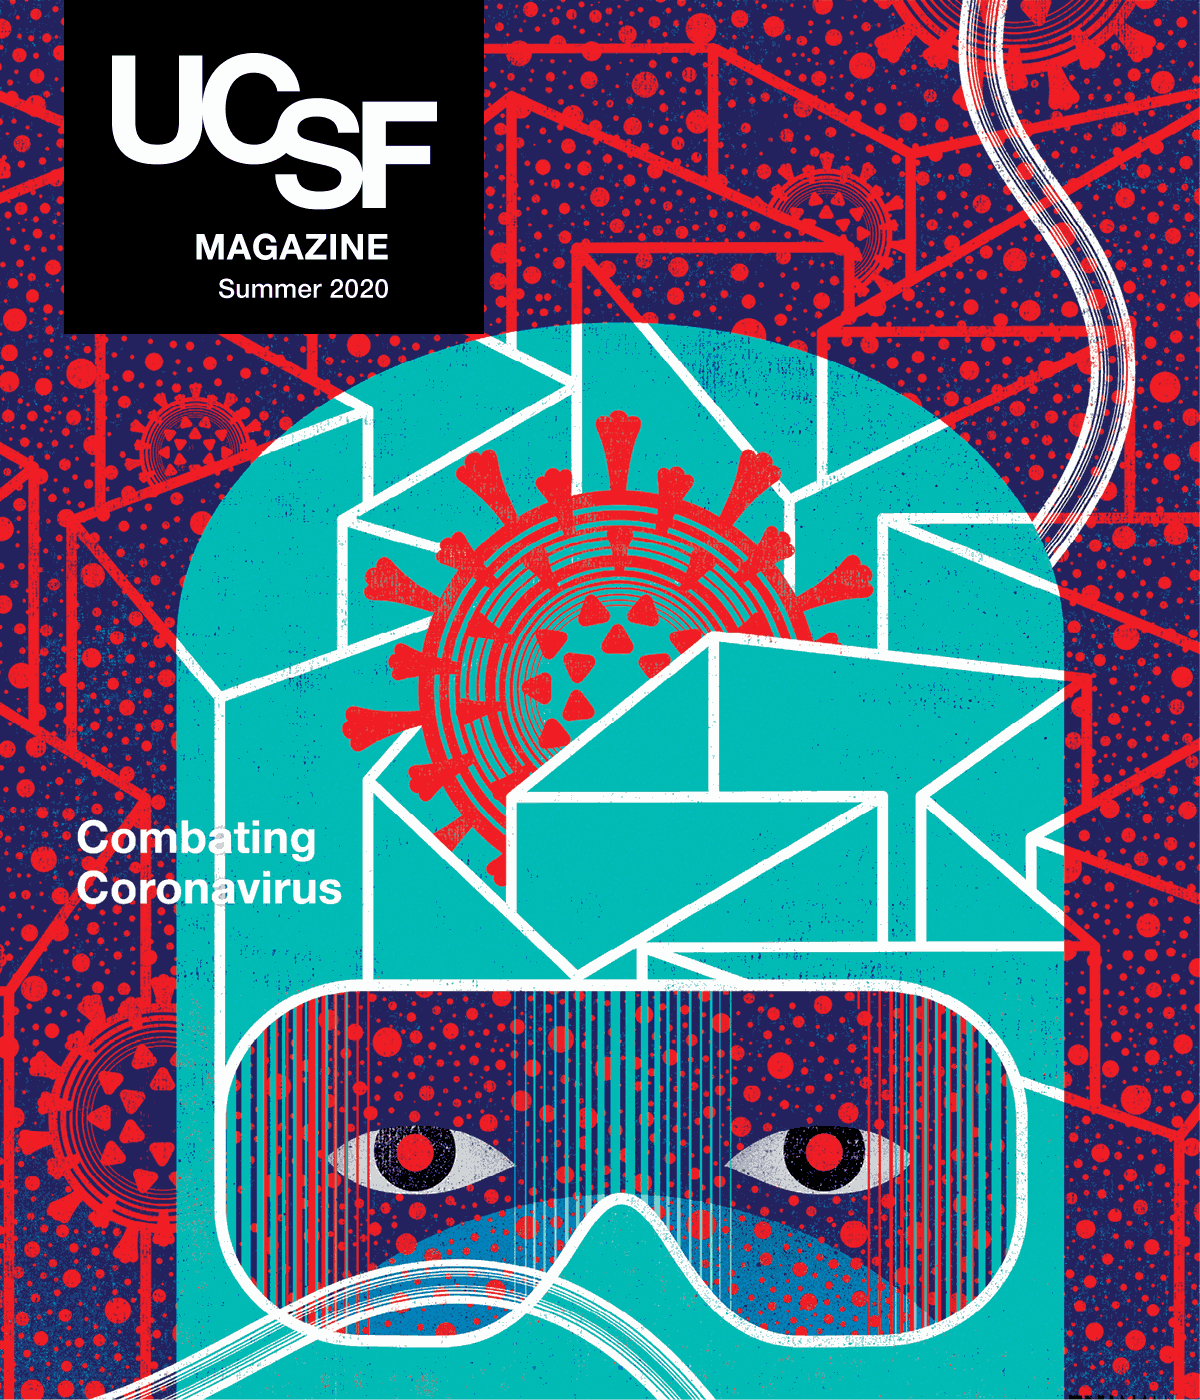 Cover of UCSF Magazine: Summer 2020. Illustration of health care worker in PPE covering head and face, with only the eyes seen through goggles; a coronavirus symbol is in the middle of the head covering; a labyrinth surrounds the person with coronavirus symbols; text reads “Combating Coronavirus.”